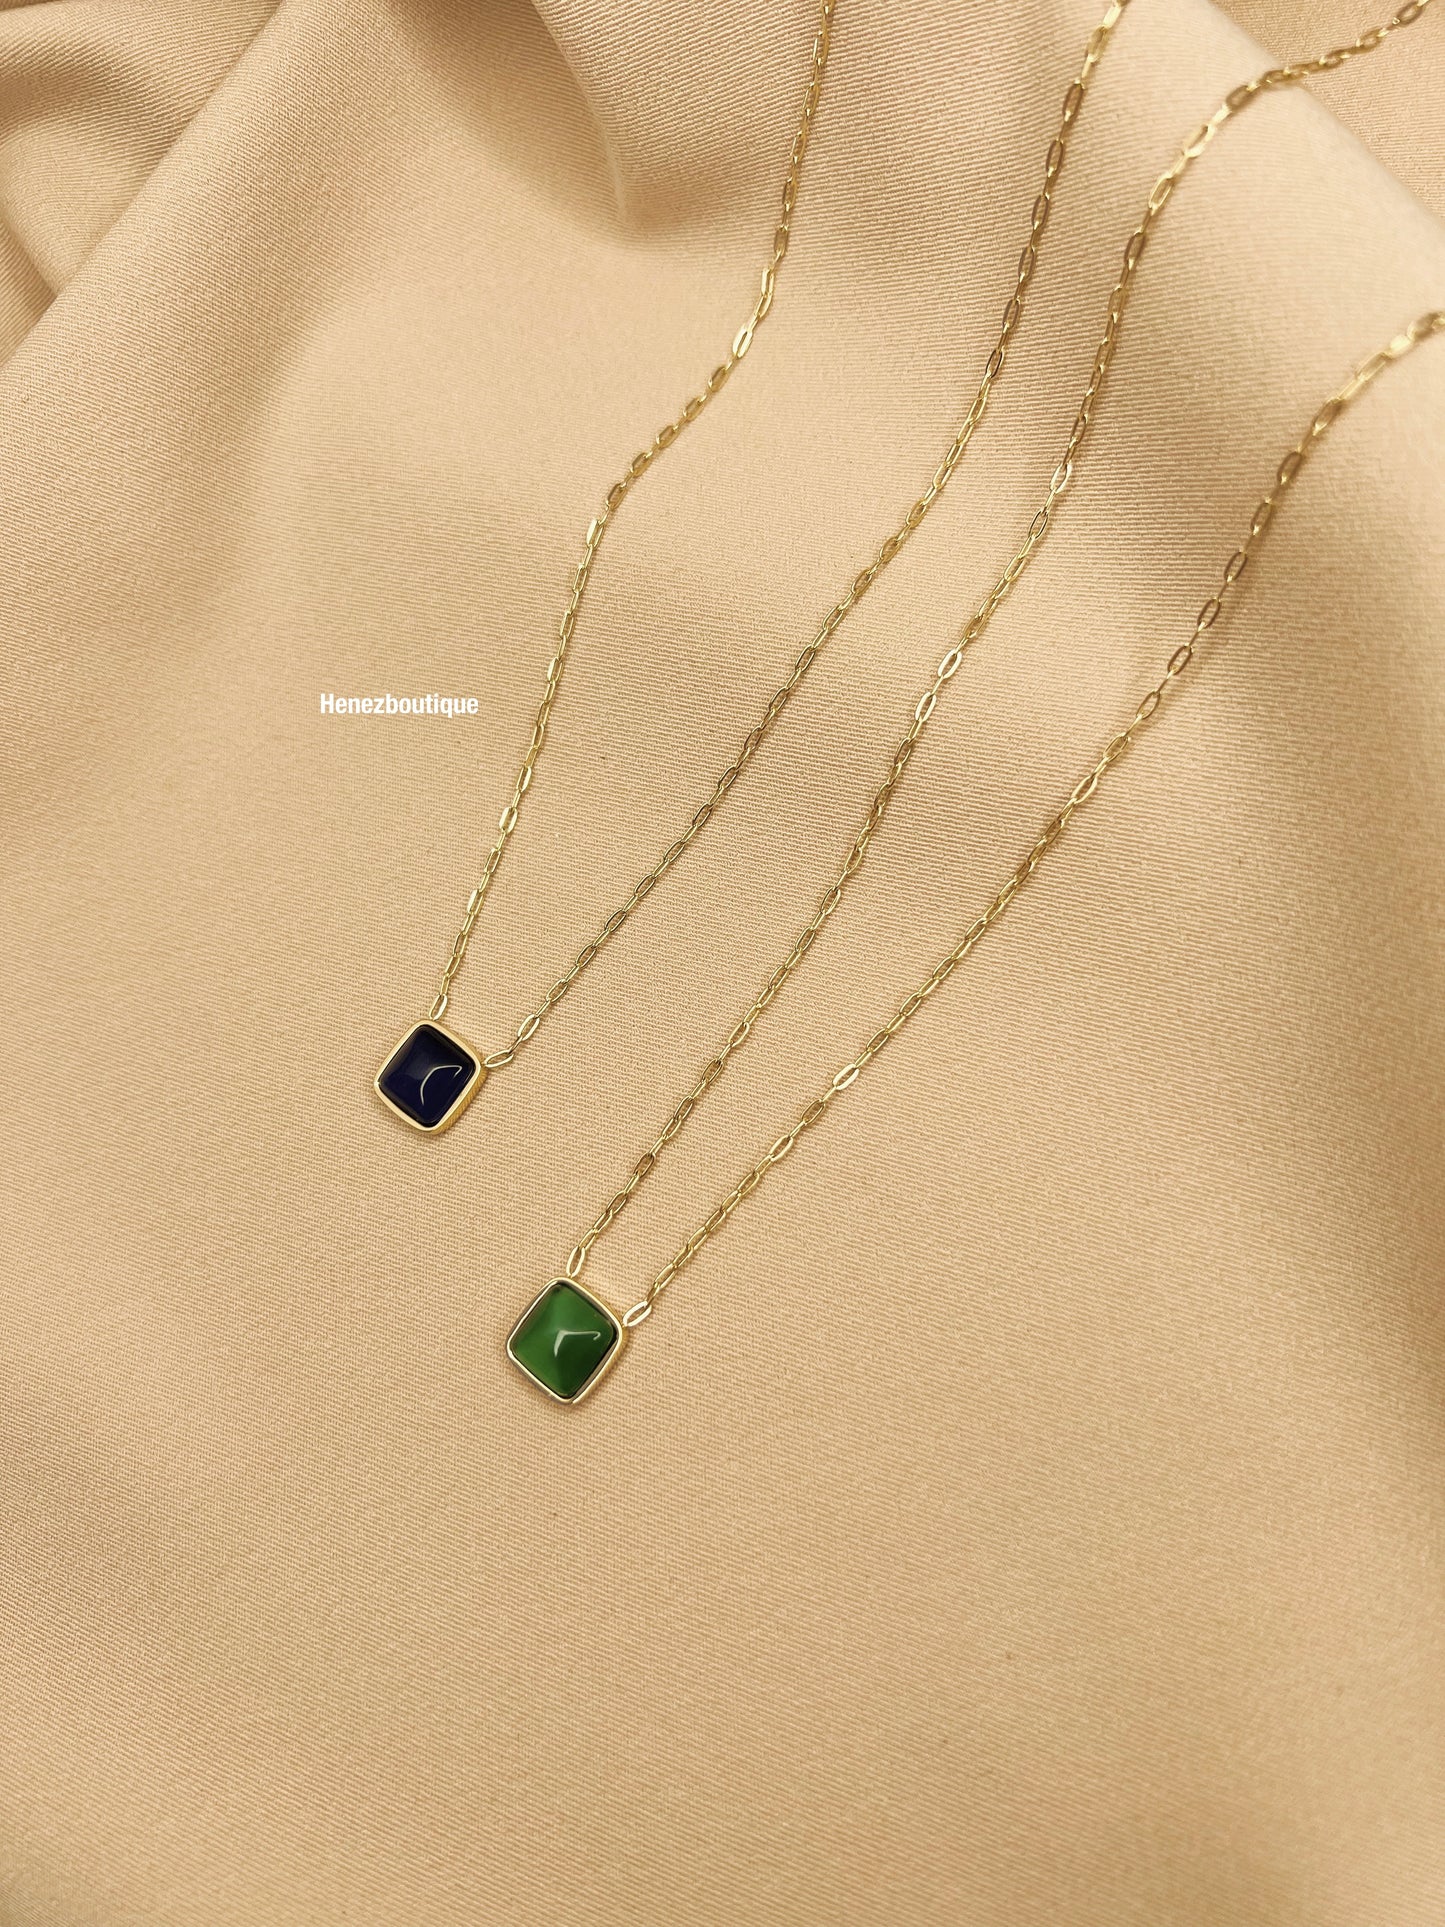 Blue and green stone necklaces